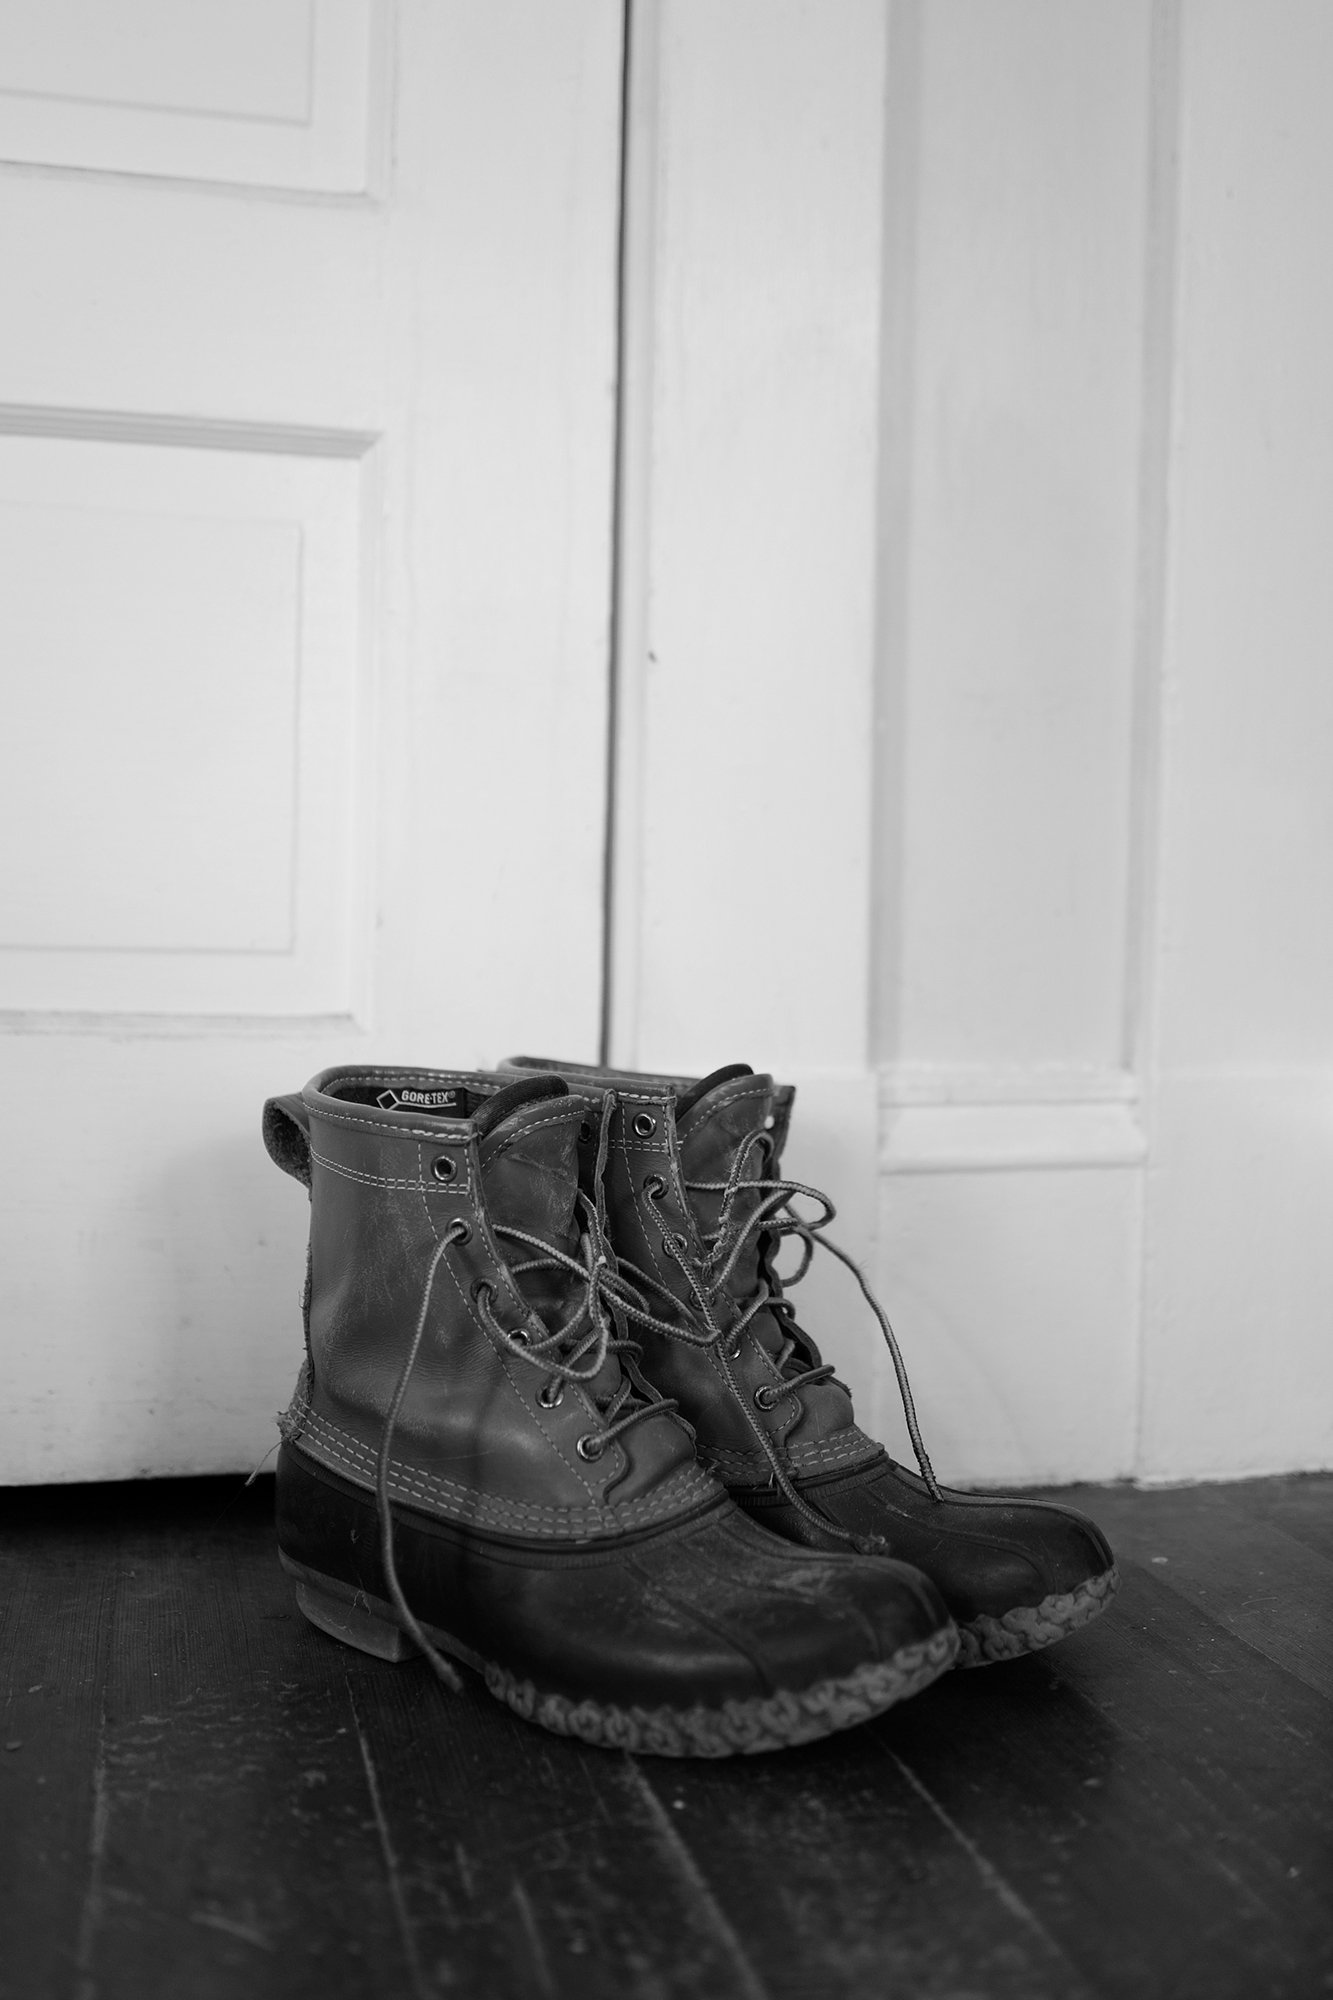 My Boots